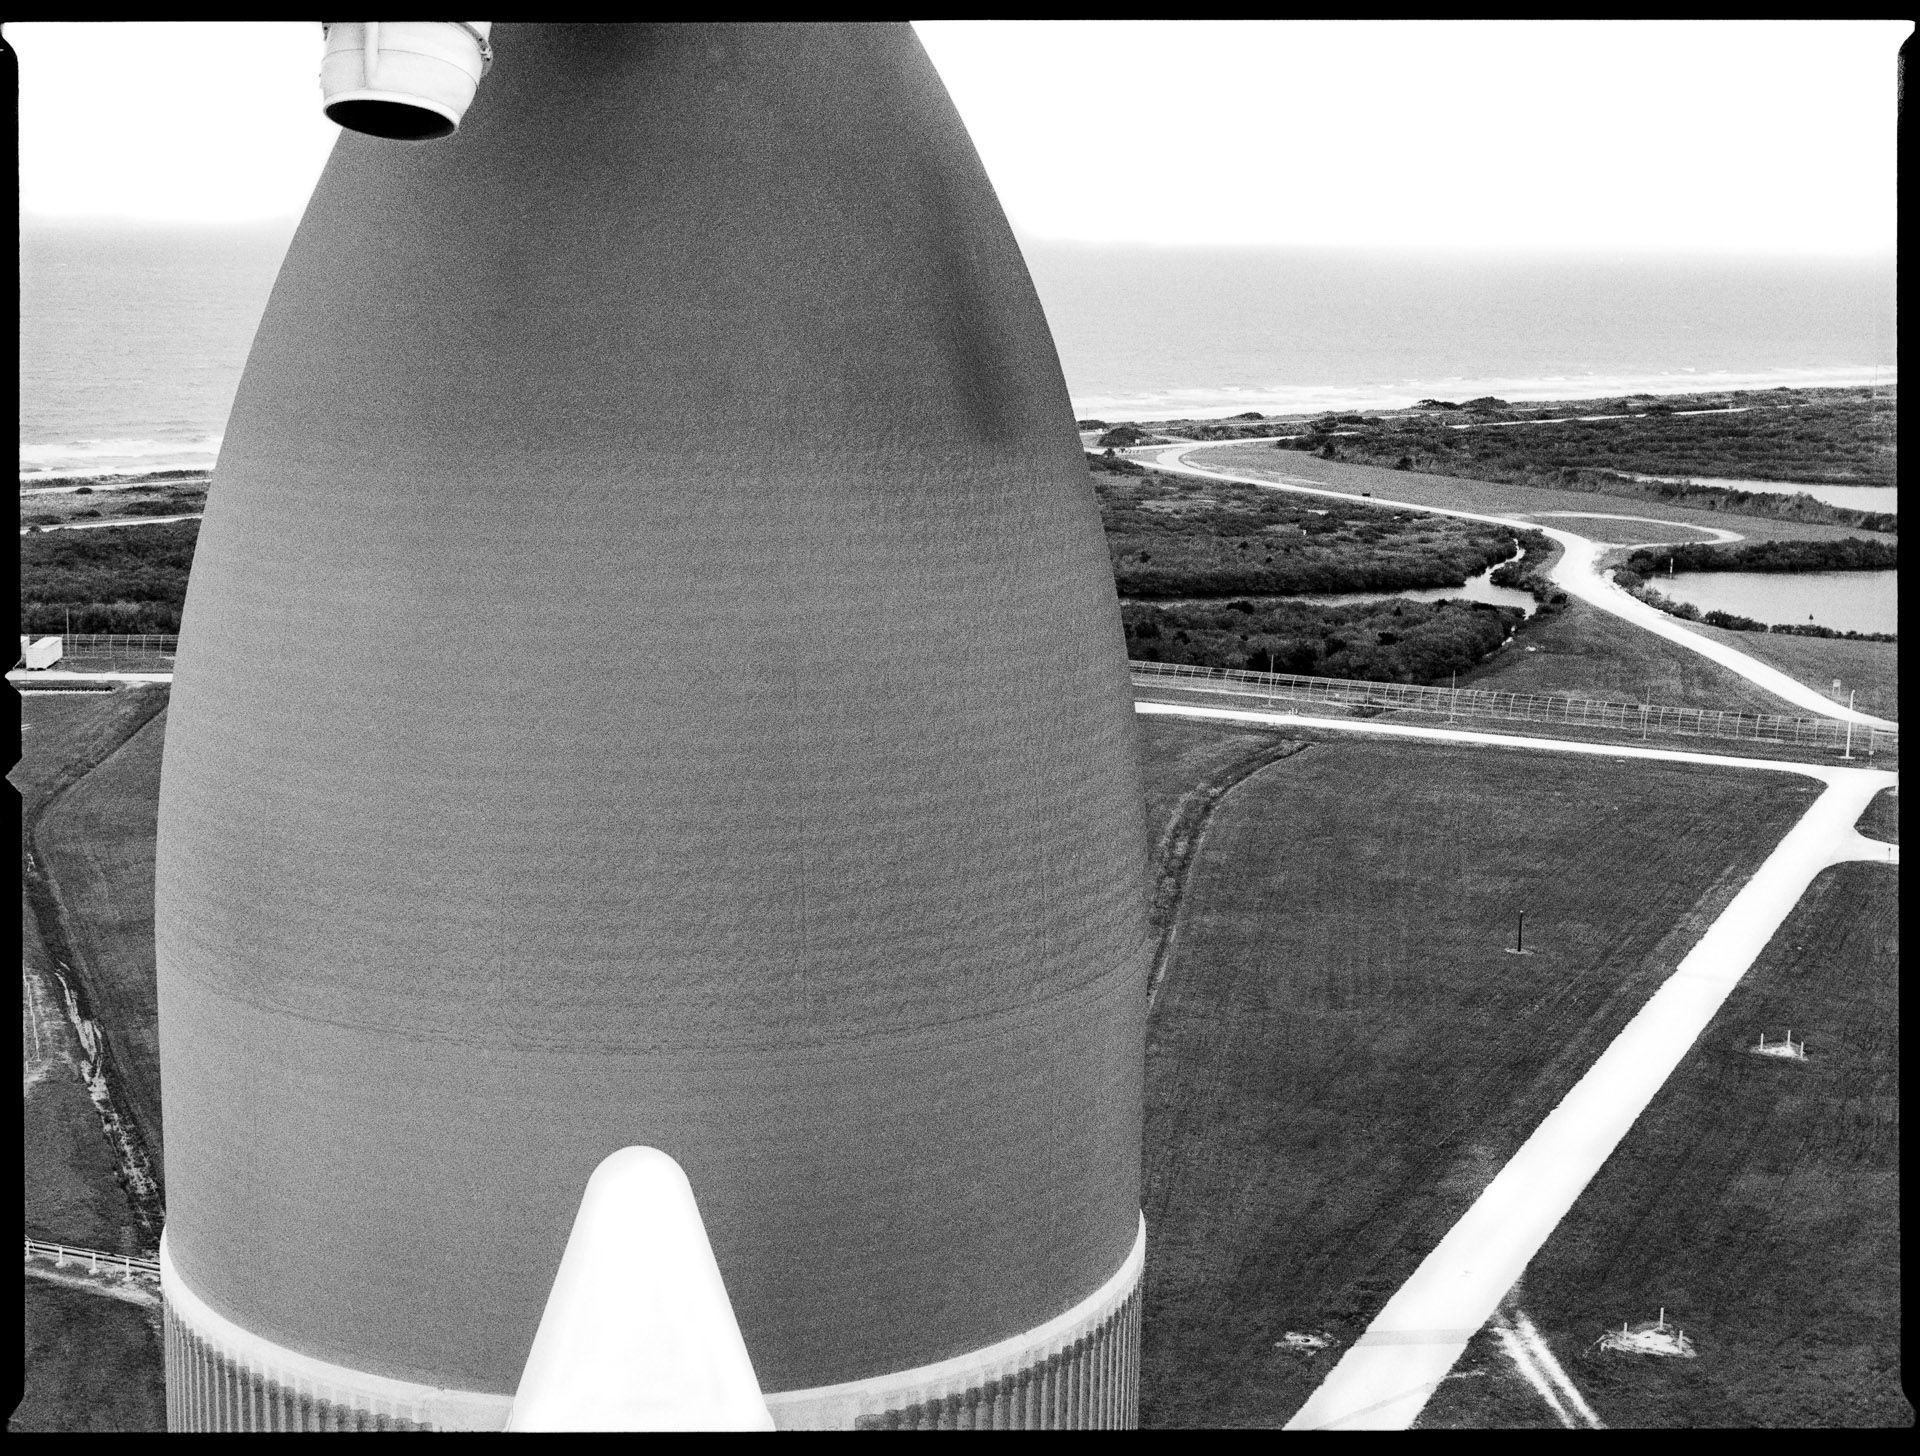 Nose cone of the Space Shuttle's External Fuel Tank